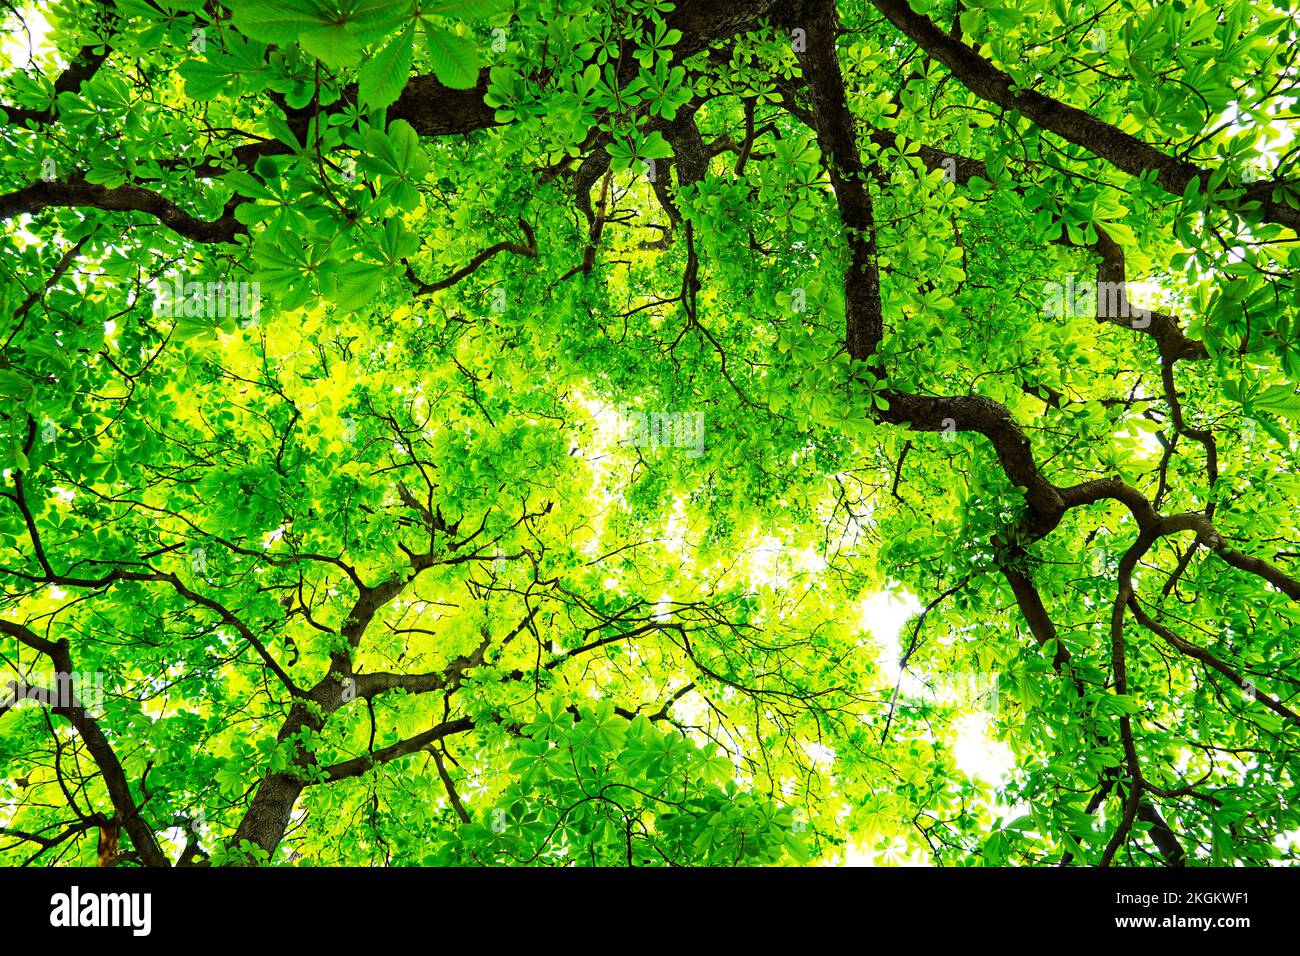 View of the crown of a chestnut tree with fresh leaves. Green natural background in summer. Stock Photo